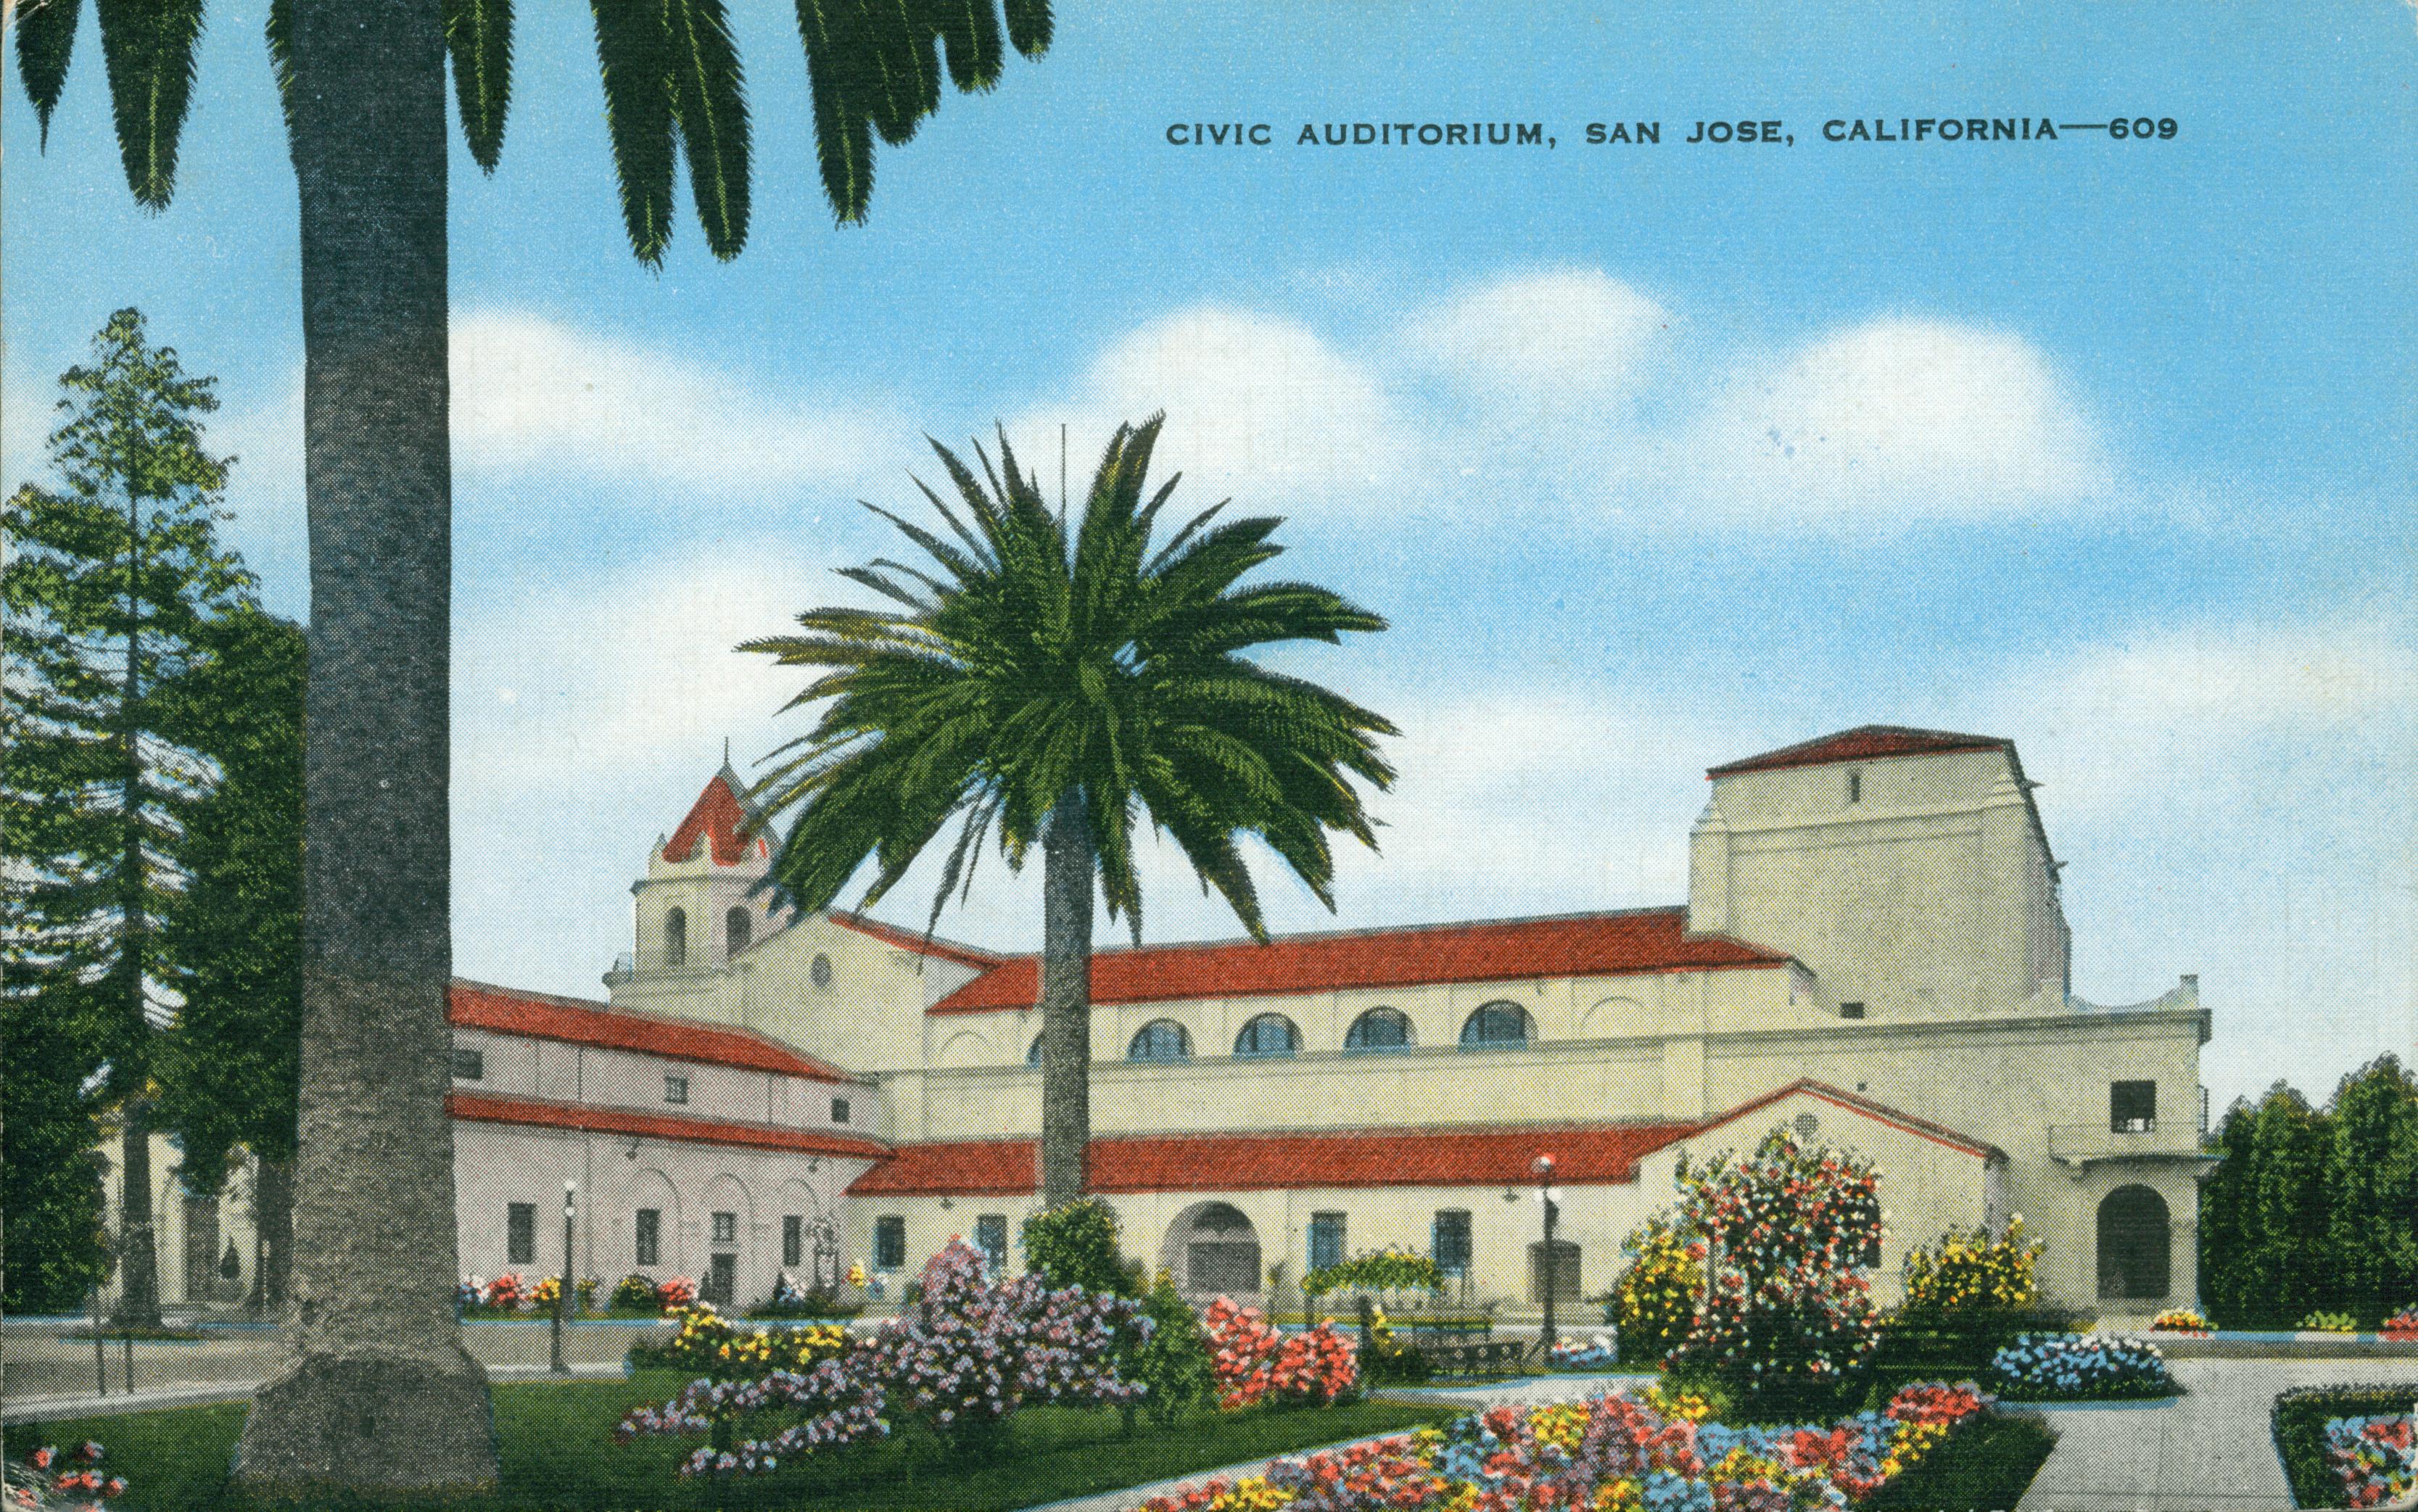 Exterior view of the Civic Auditorium and surrounding gardens and flowers